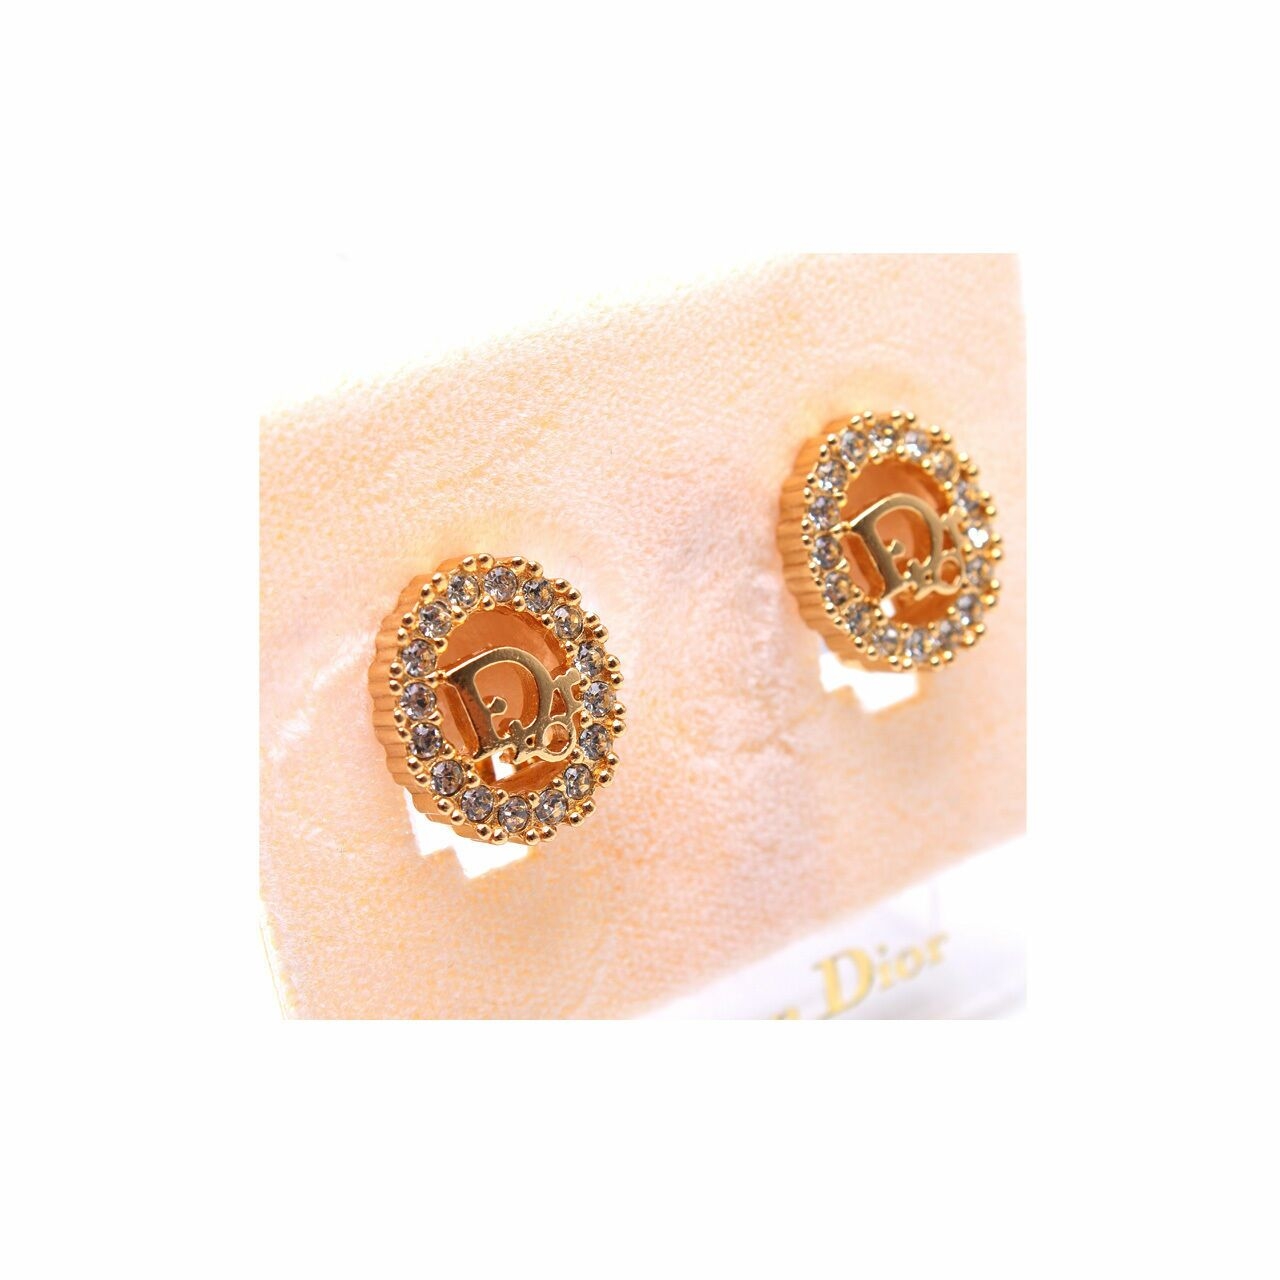 Christian Dior Vintage Gold Earrings